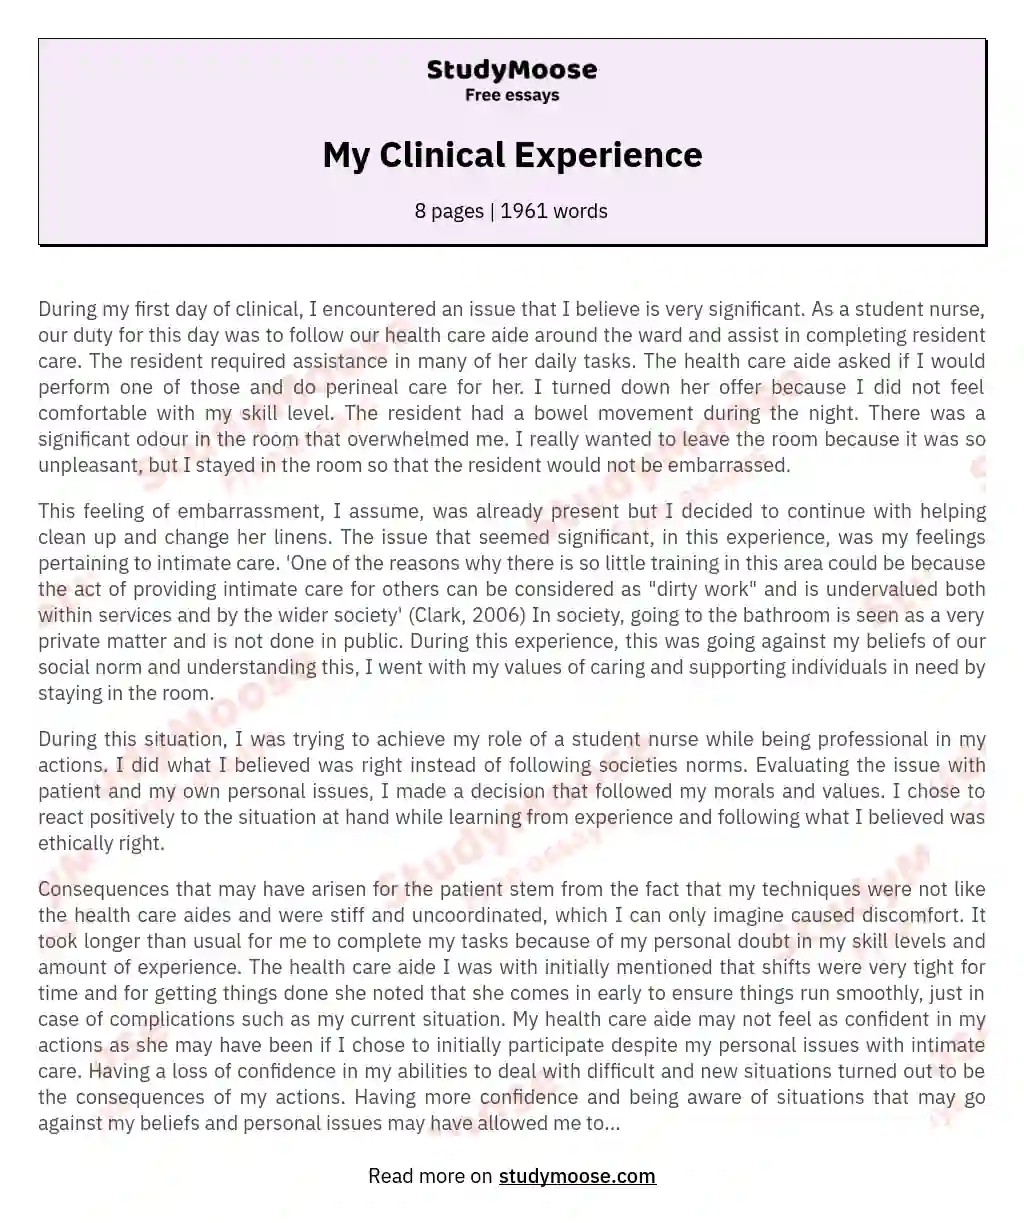 My Clinical Experience essay